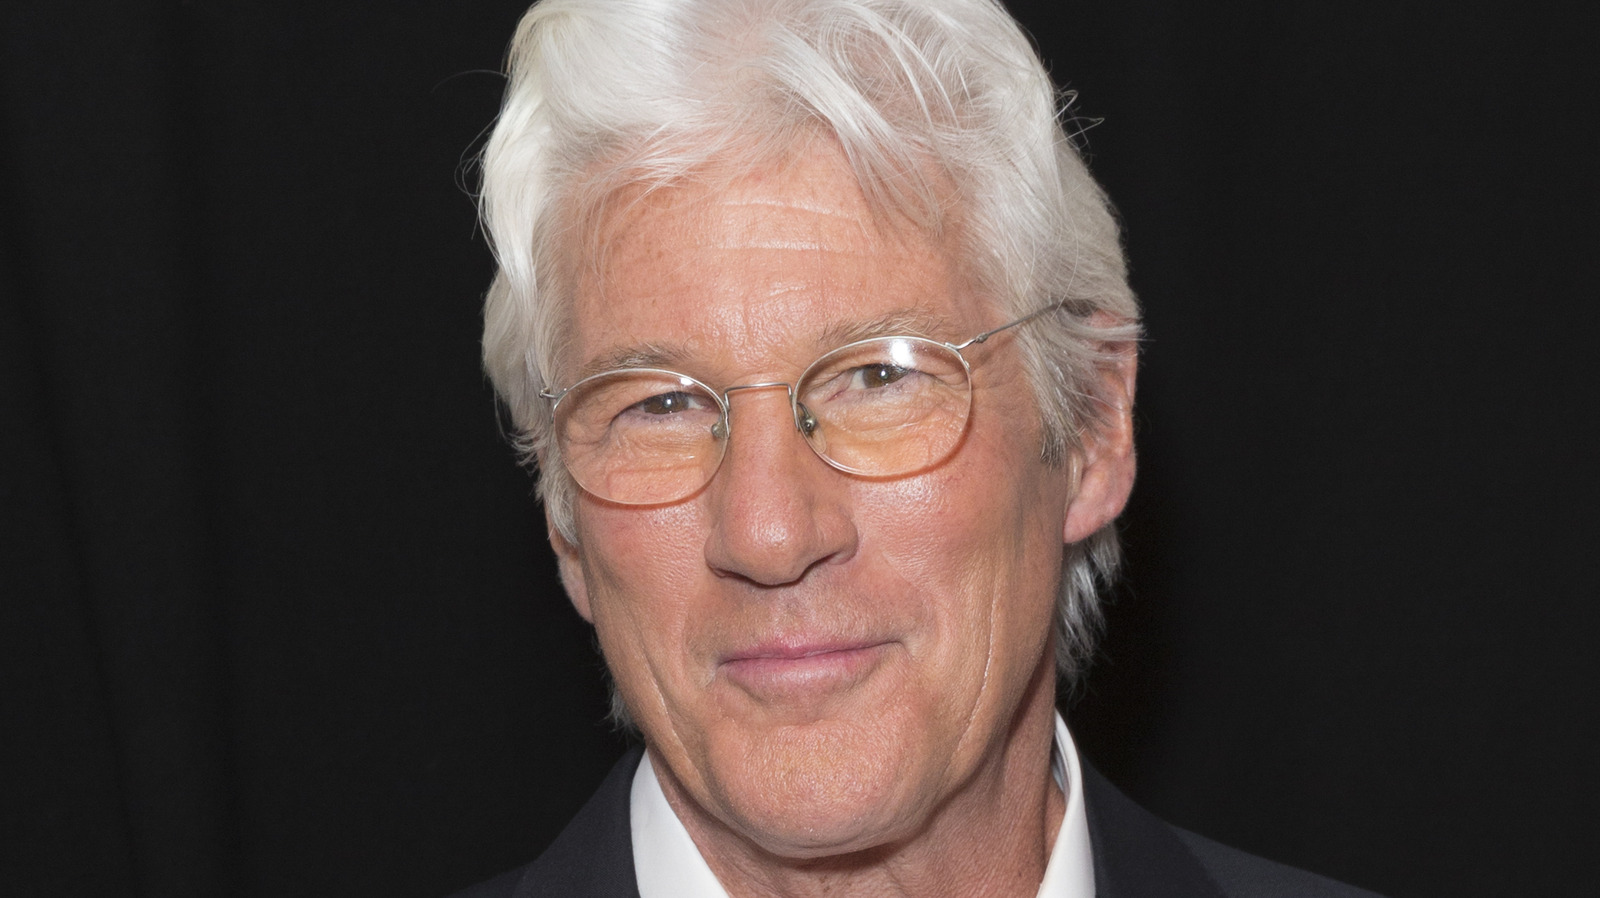 https://www.looper.com/img/gallery/50-greatest-richard-gere-movies-ranked-worst-to-best/l-intro-1651693268.jpg